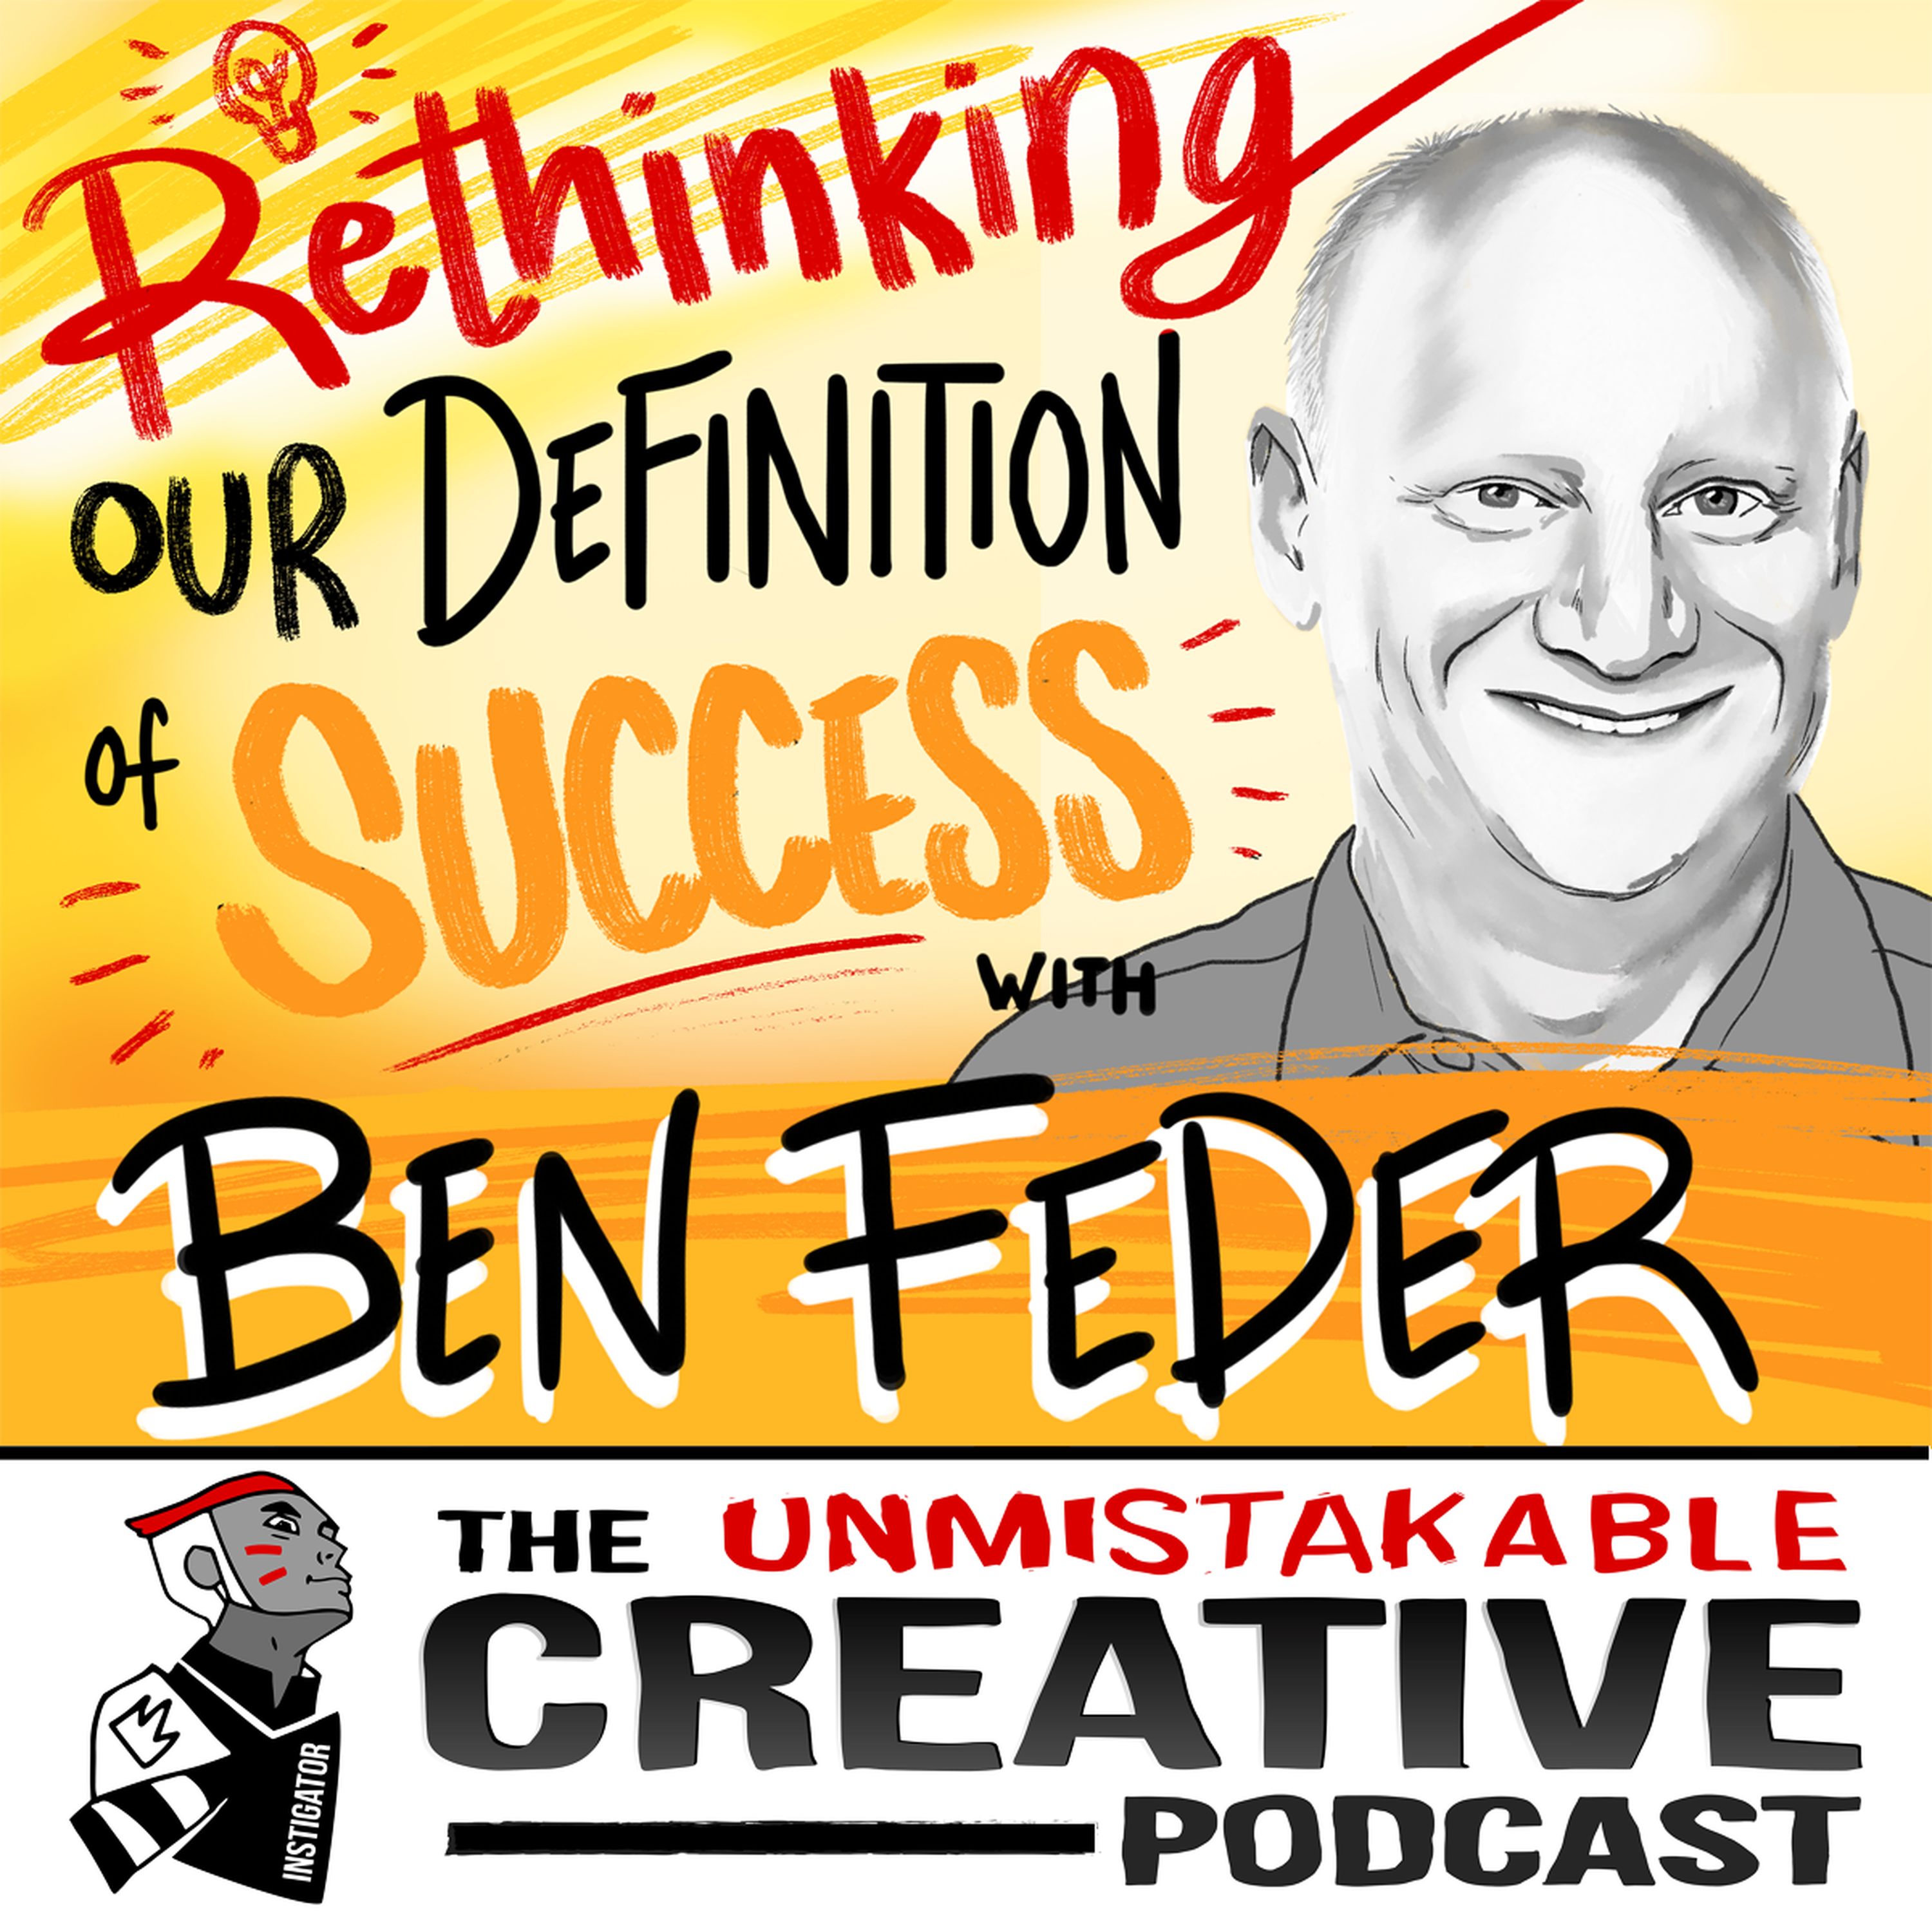 Ben Feder: Rethinking Our Definition of Success